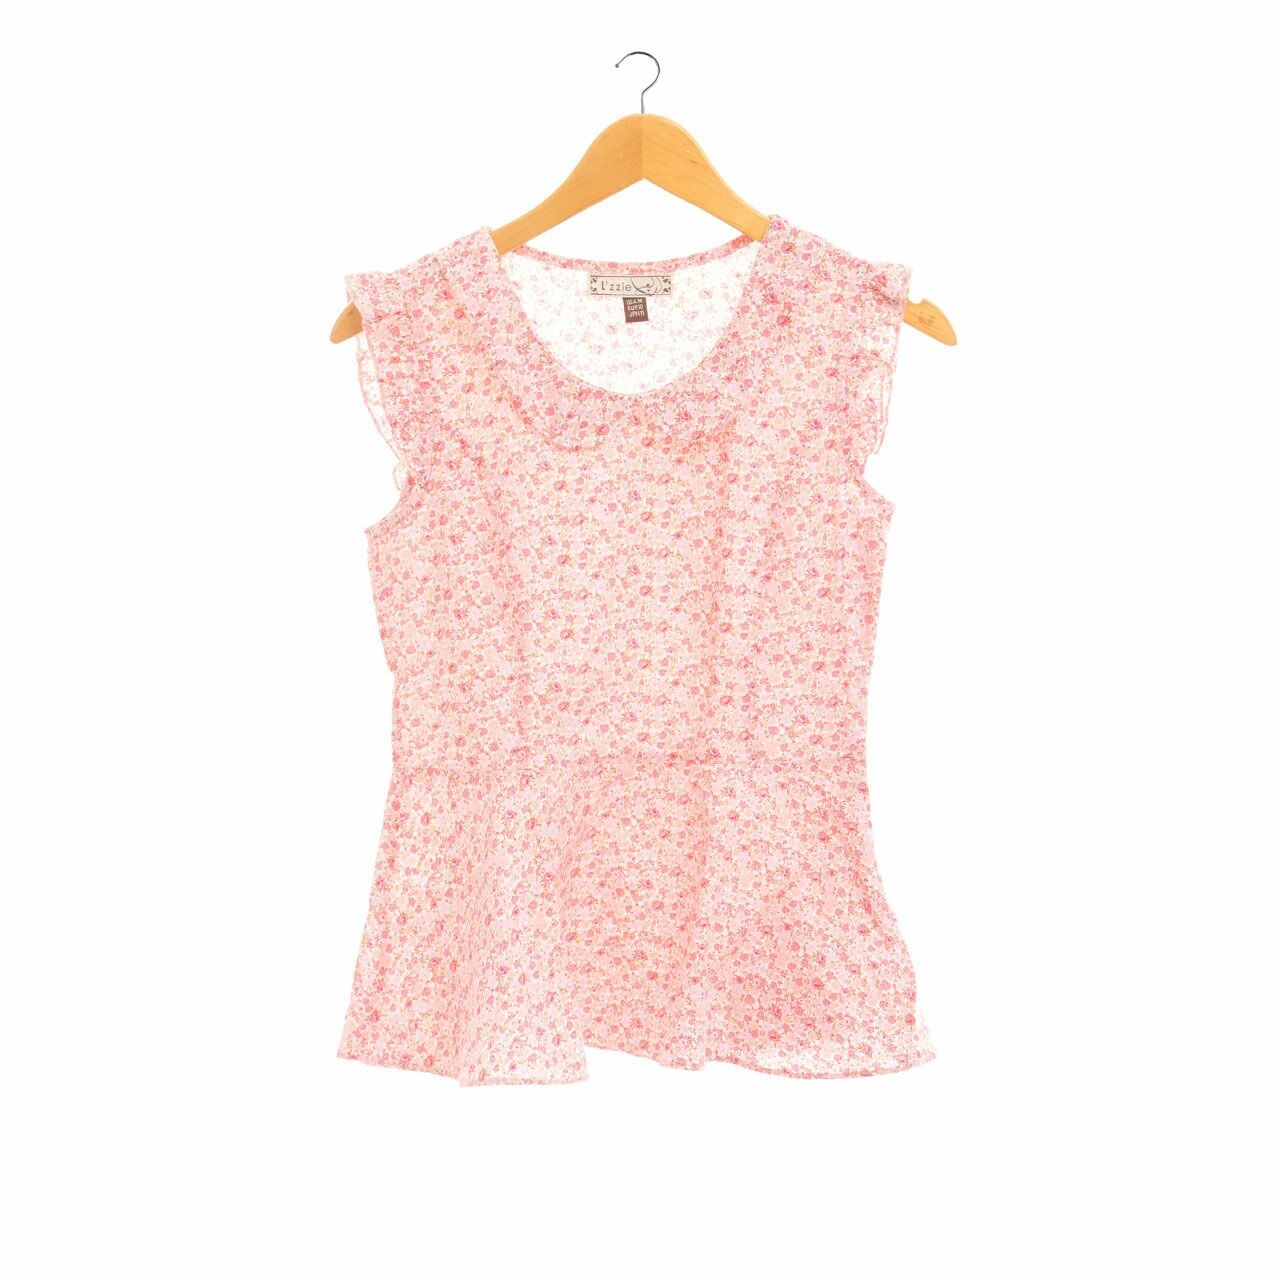 L'zzie Pink Floral Sleeveless